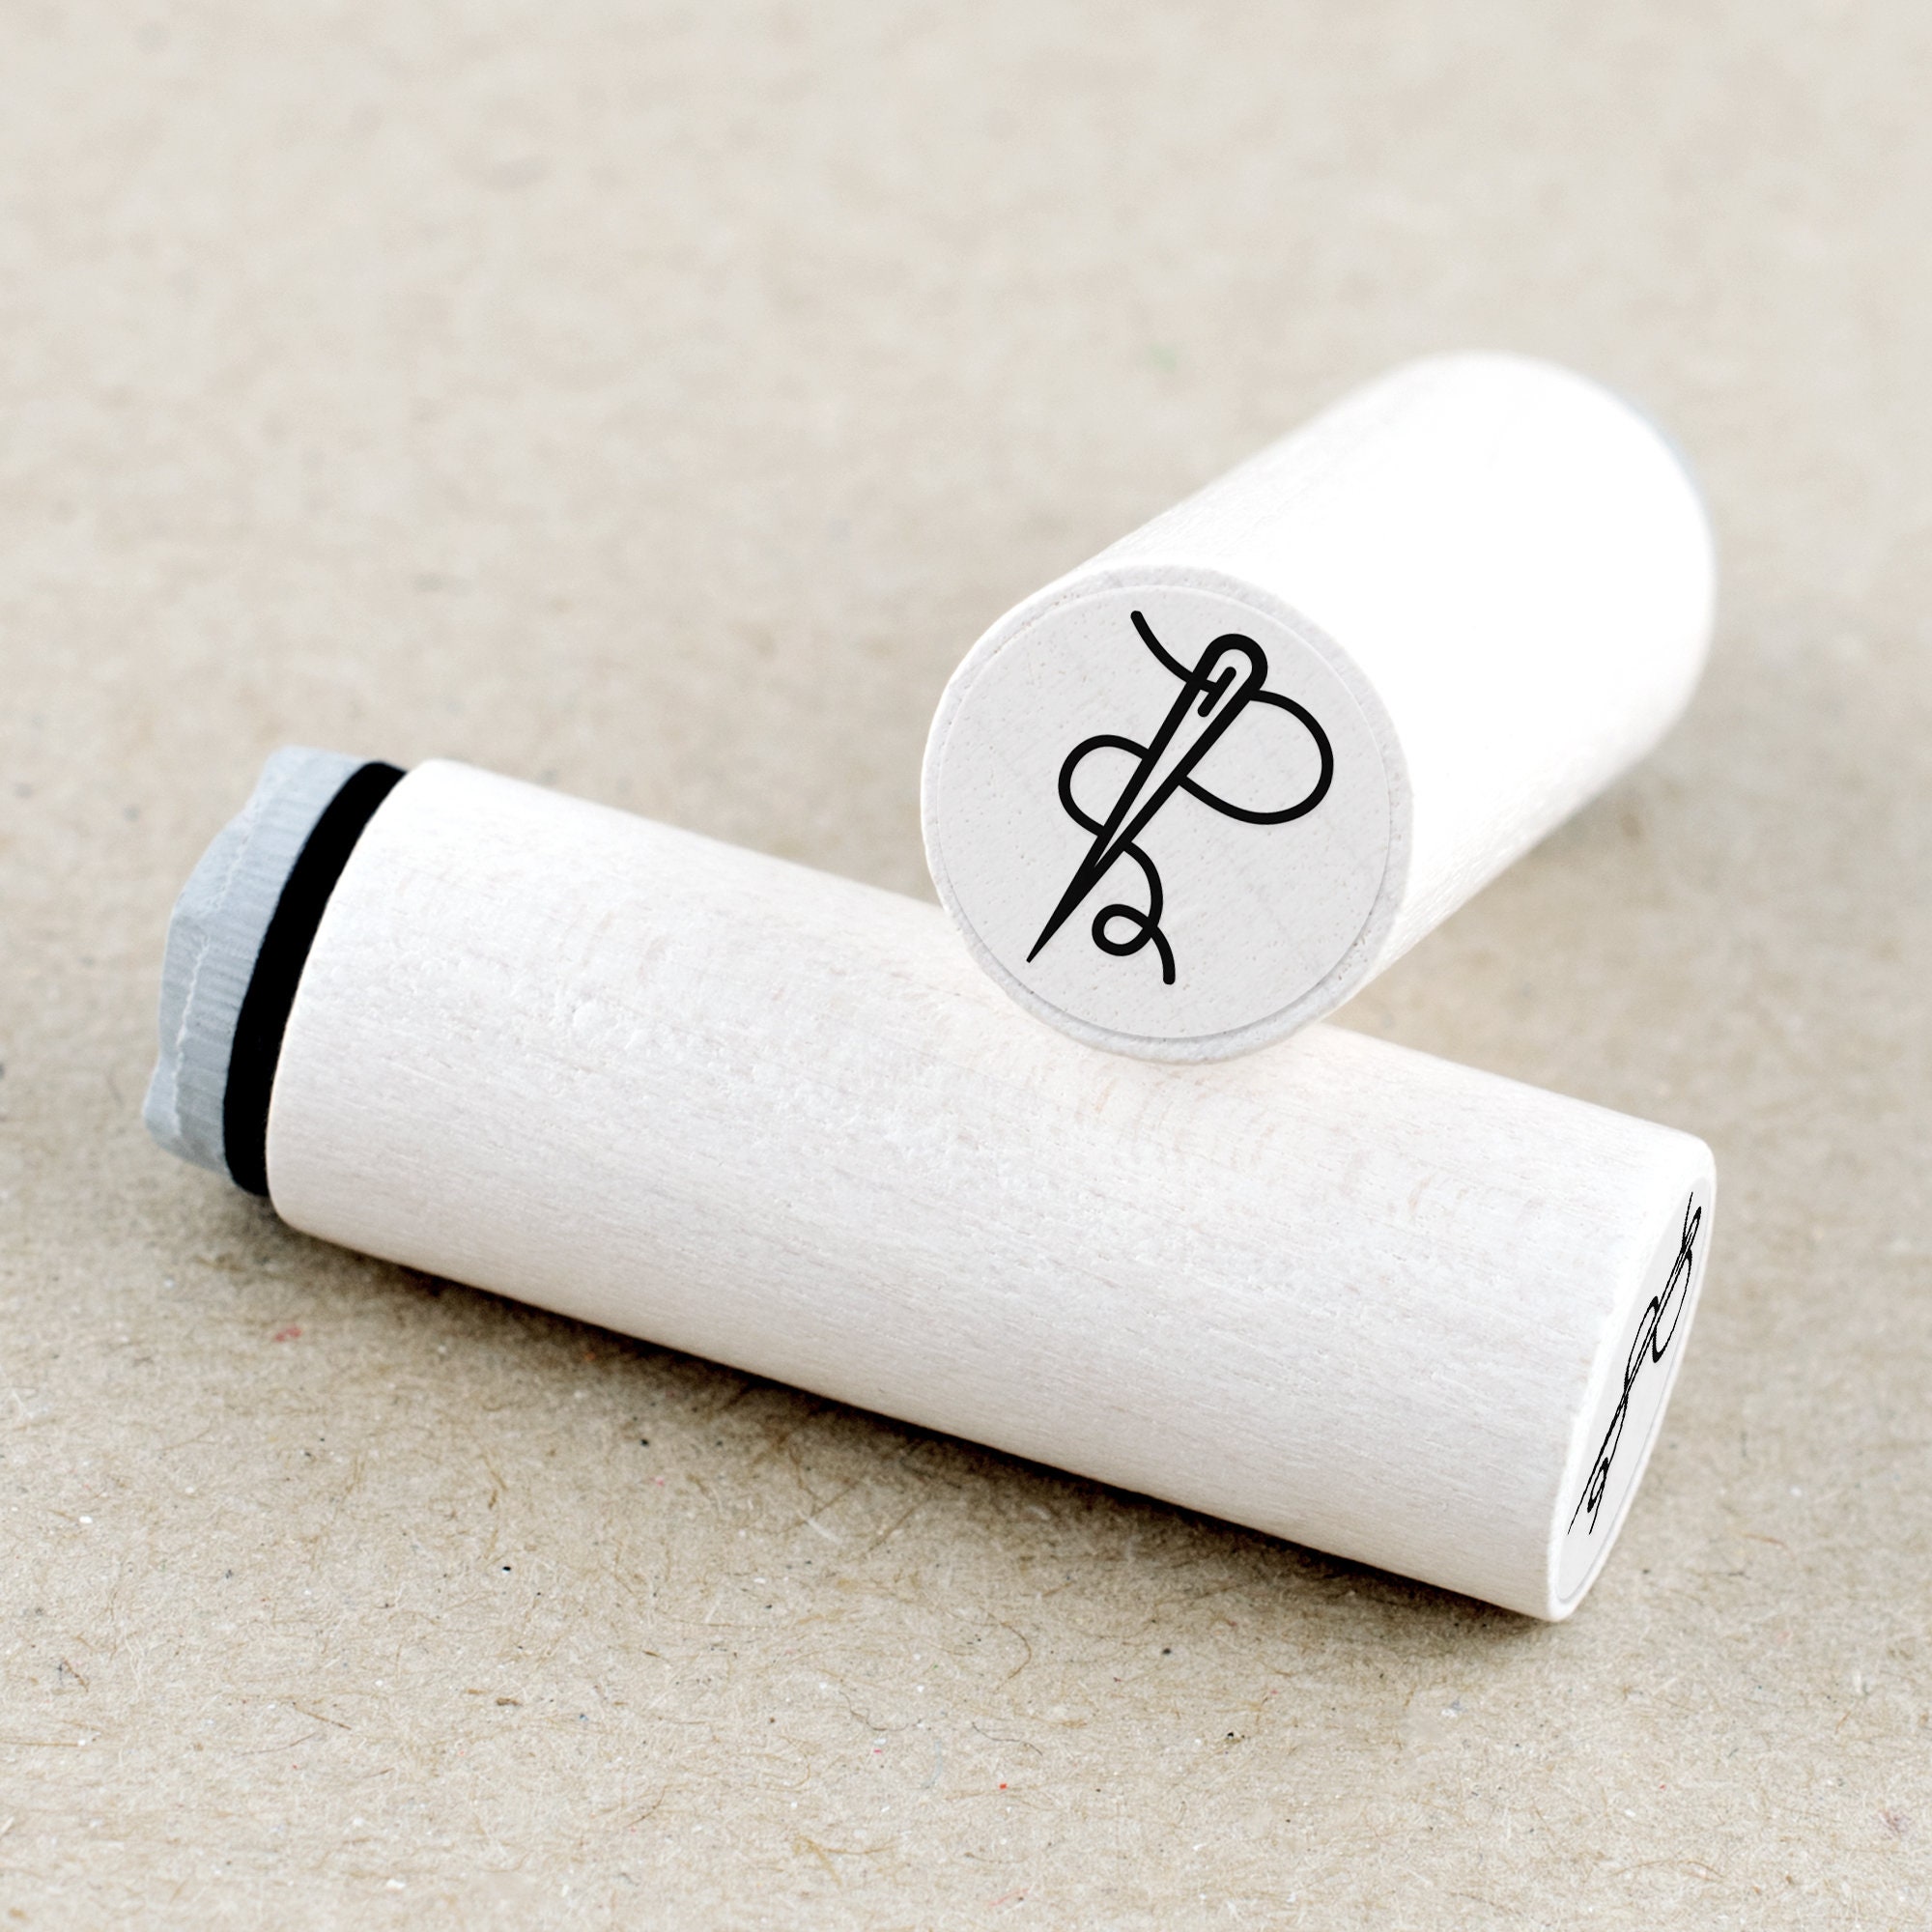 Personalized Sewing Rubber Stamp, Hand Sewn By Needle and Thread